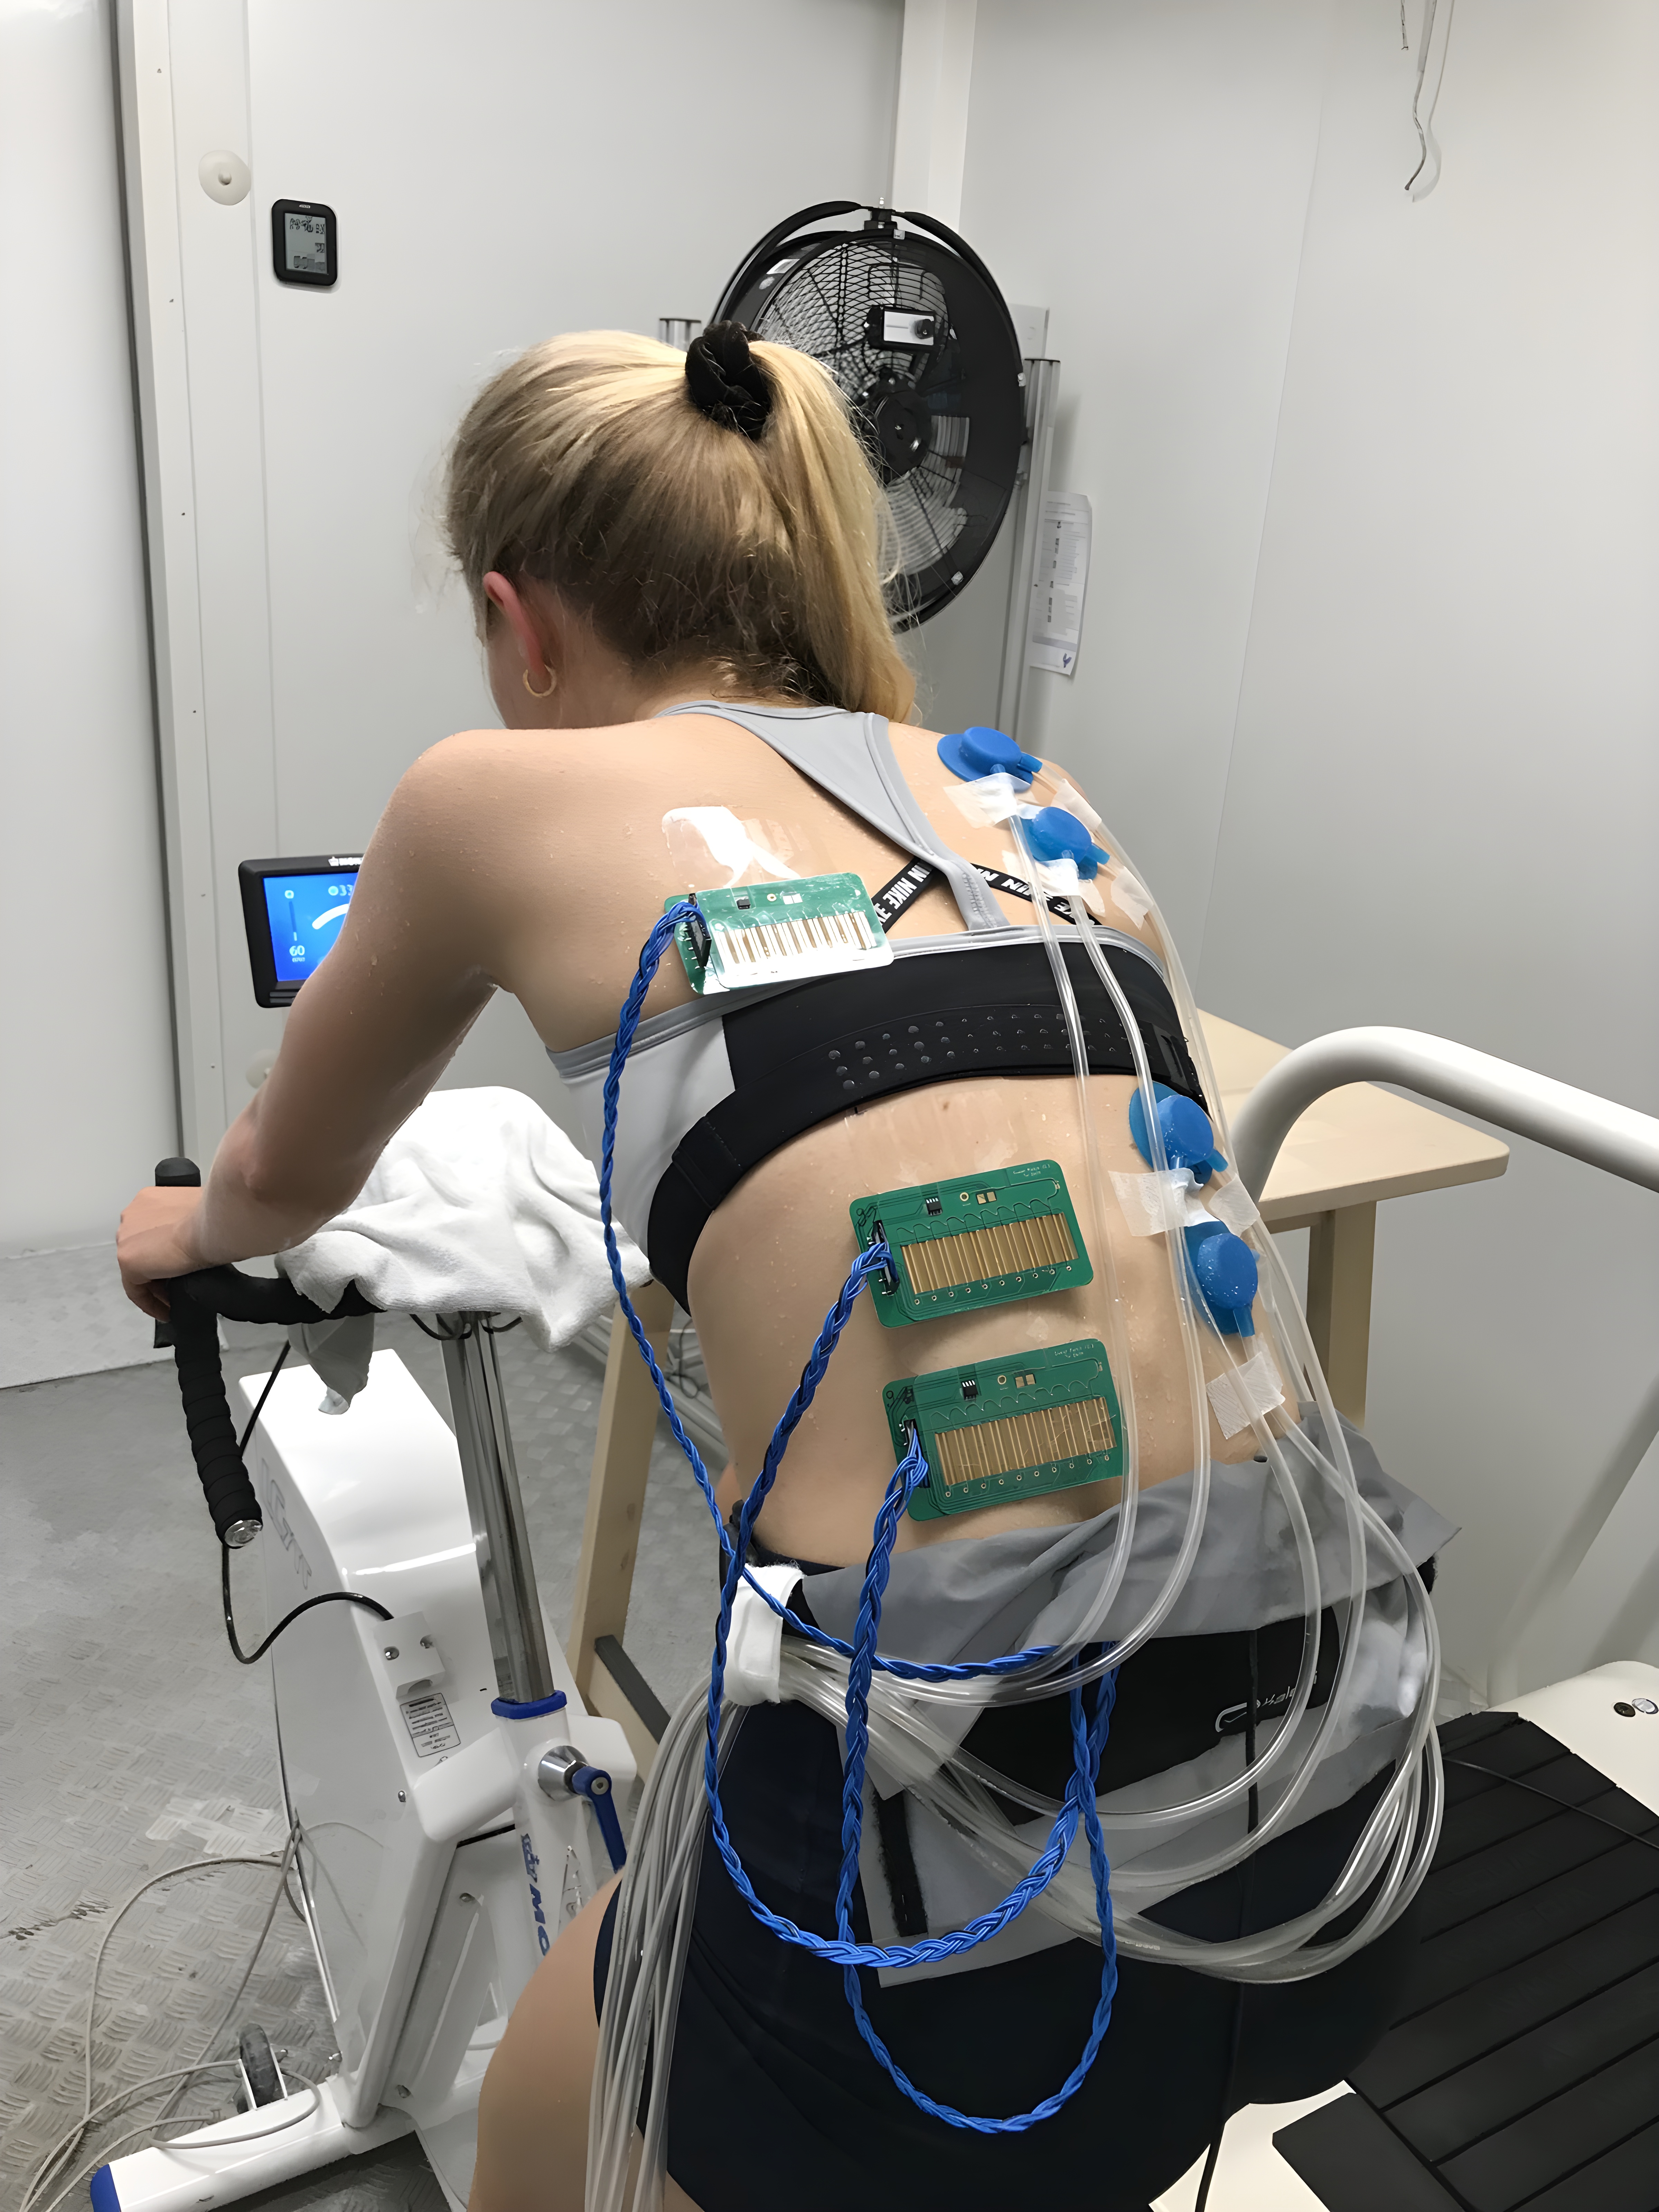 [Translate to English:] Athlete on a home trainer with sensors on her body